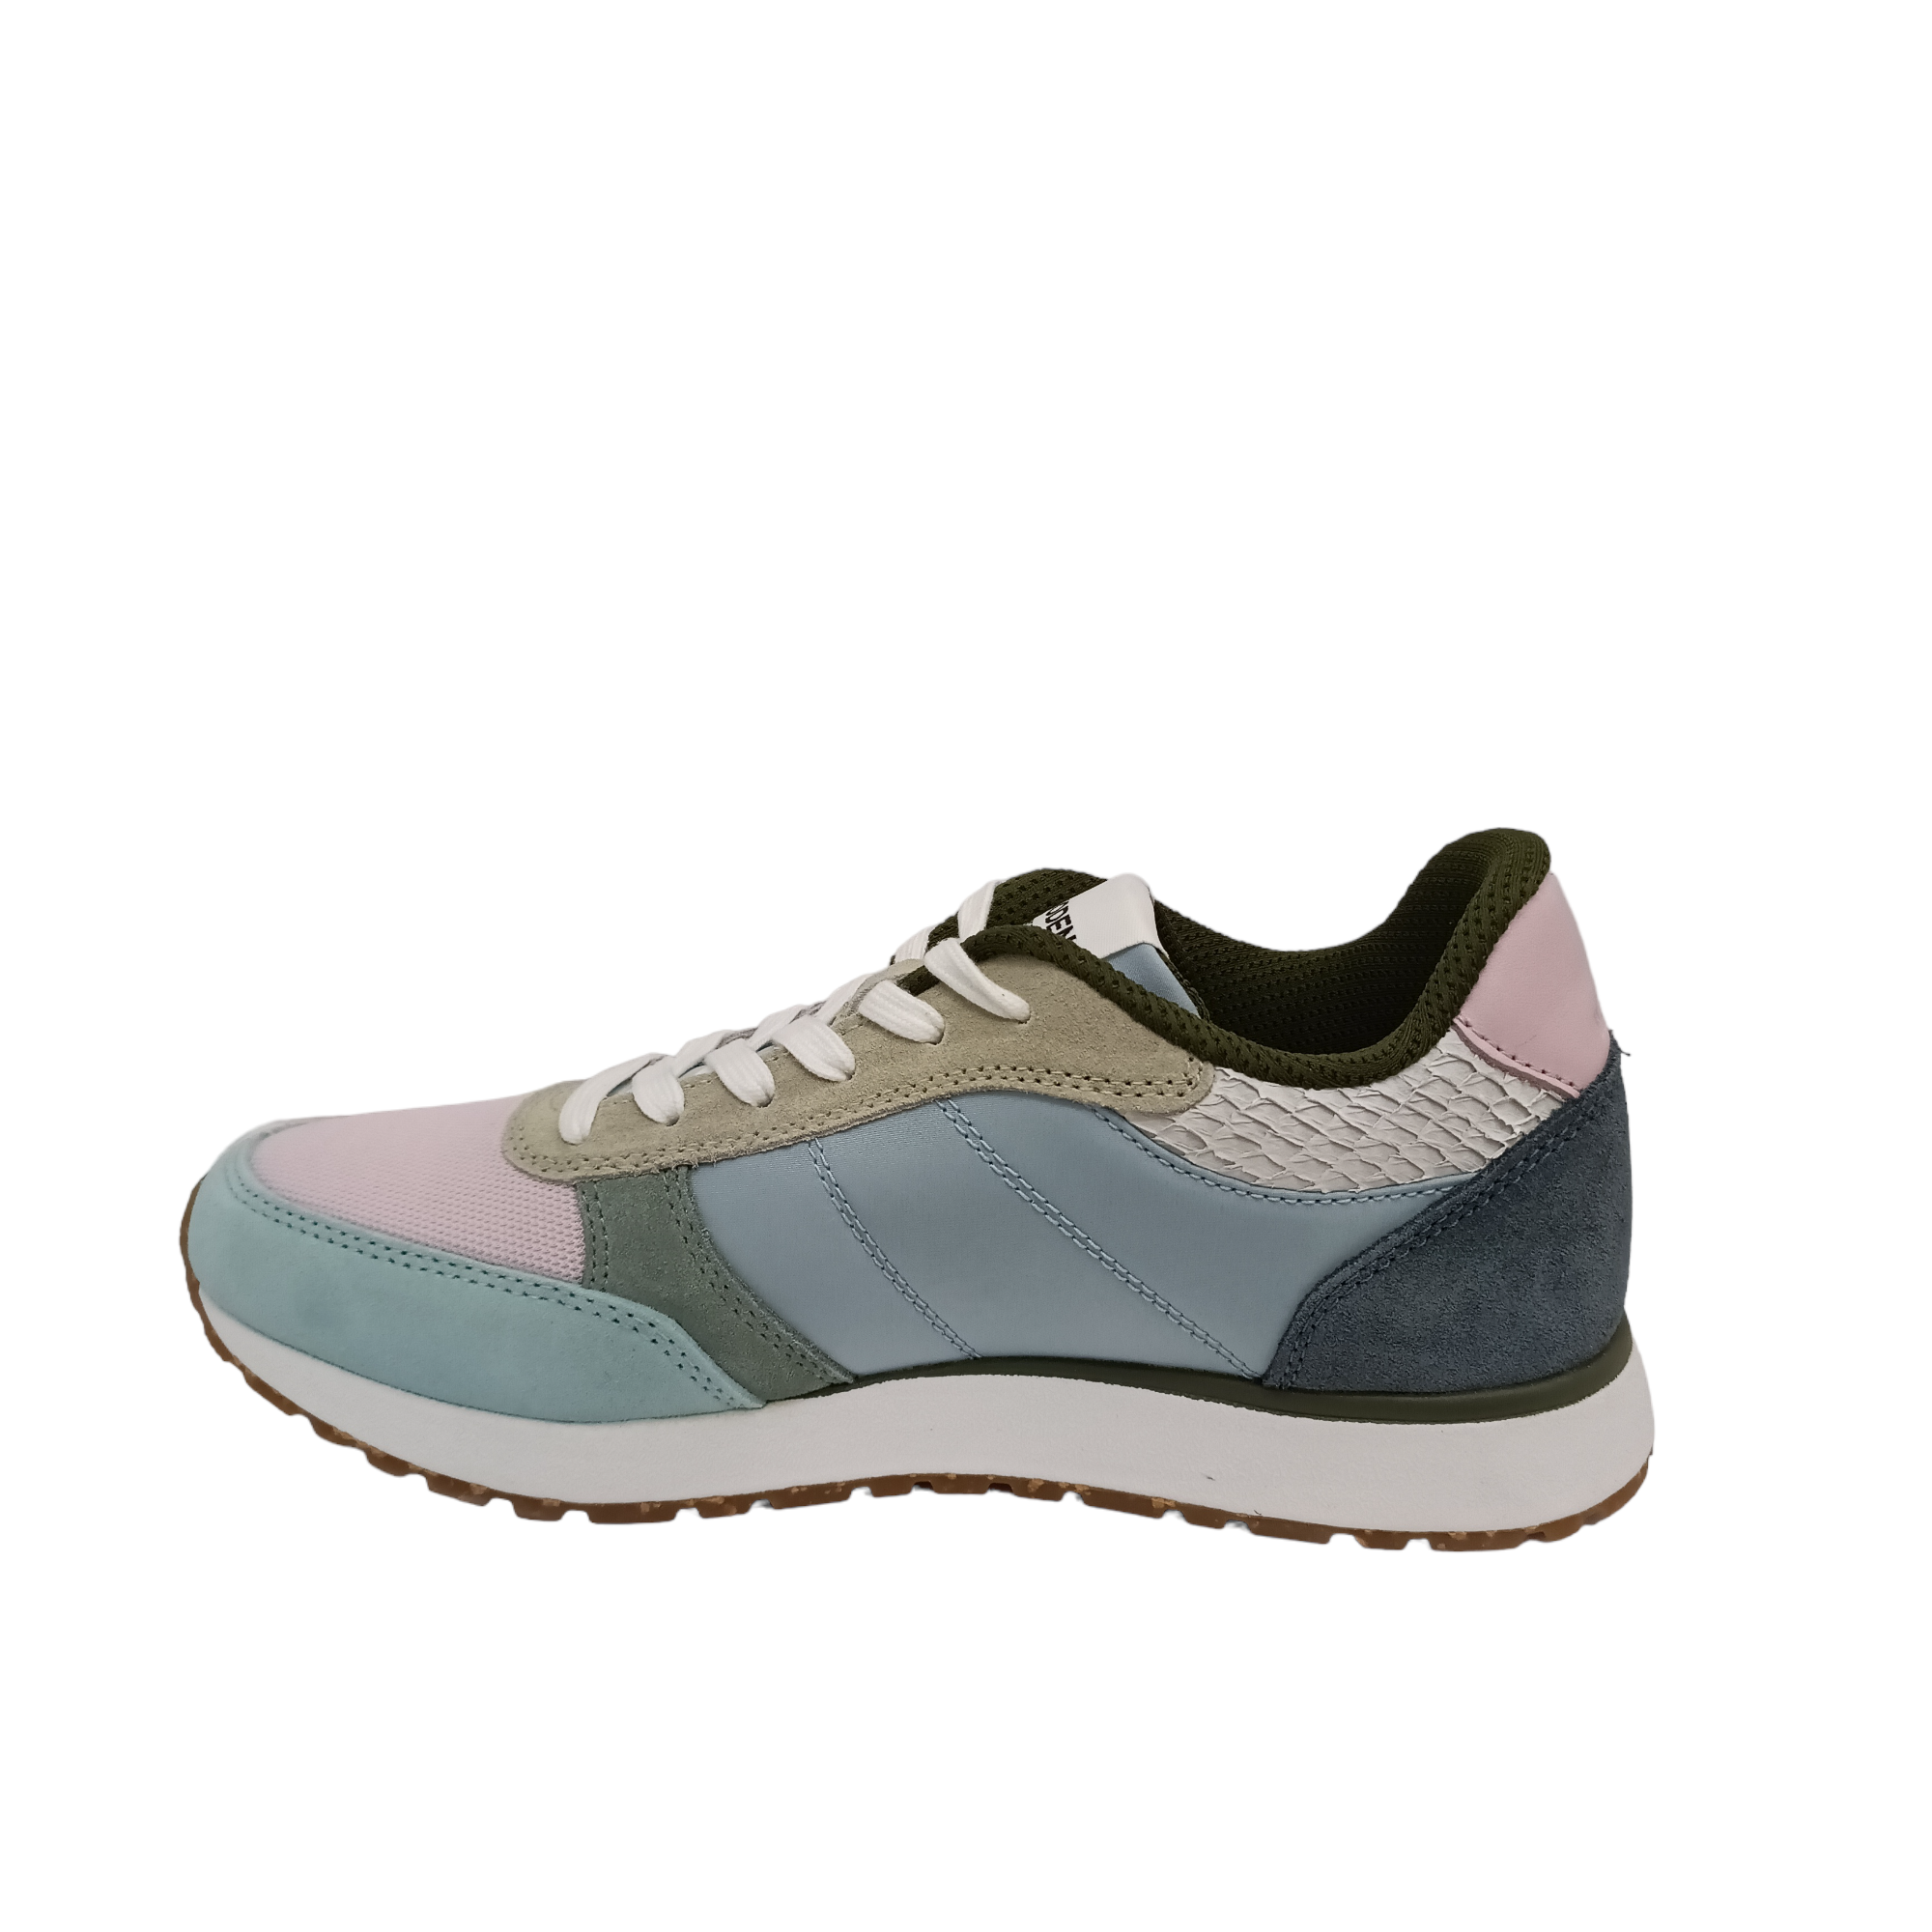 Shop Ronja Woden - with shoe&amp;me - from Woden - Sneaker - Sneaker, Winter, Womens - [collection]